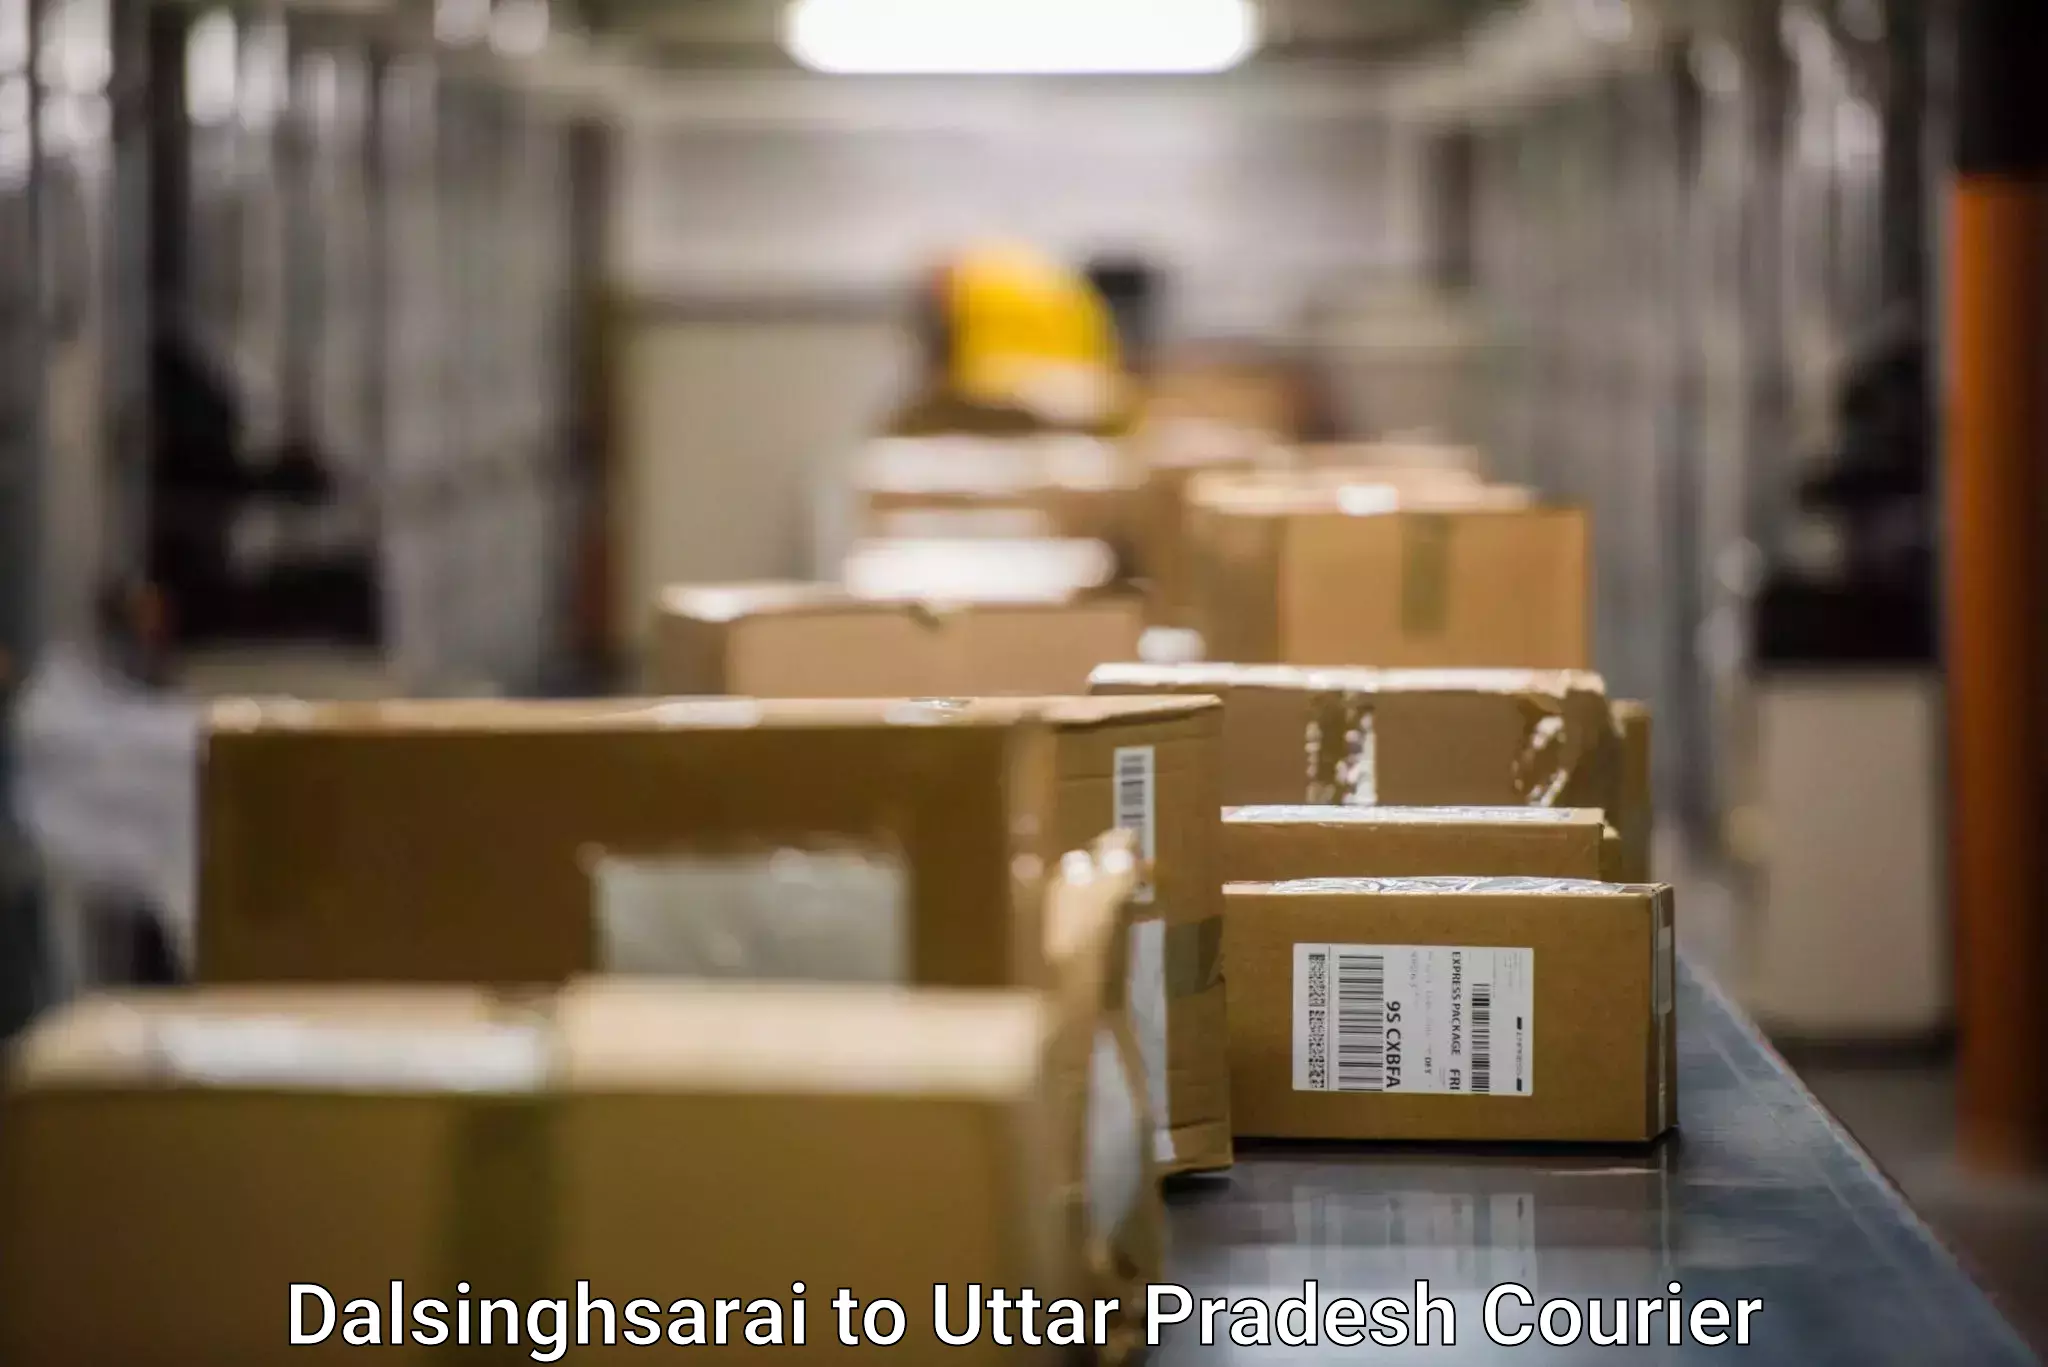 Global courier networks Dalsinghsarai to Bhathat